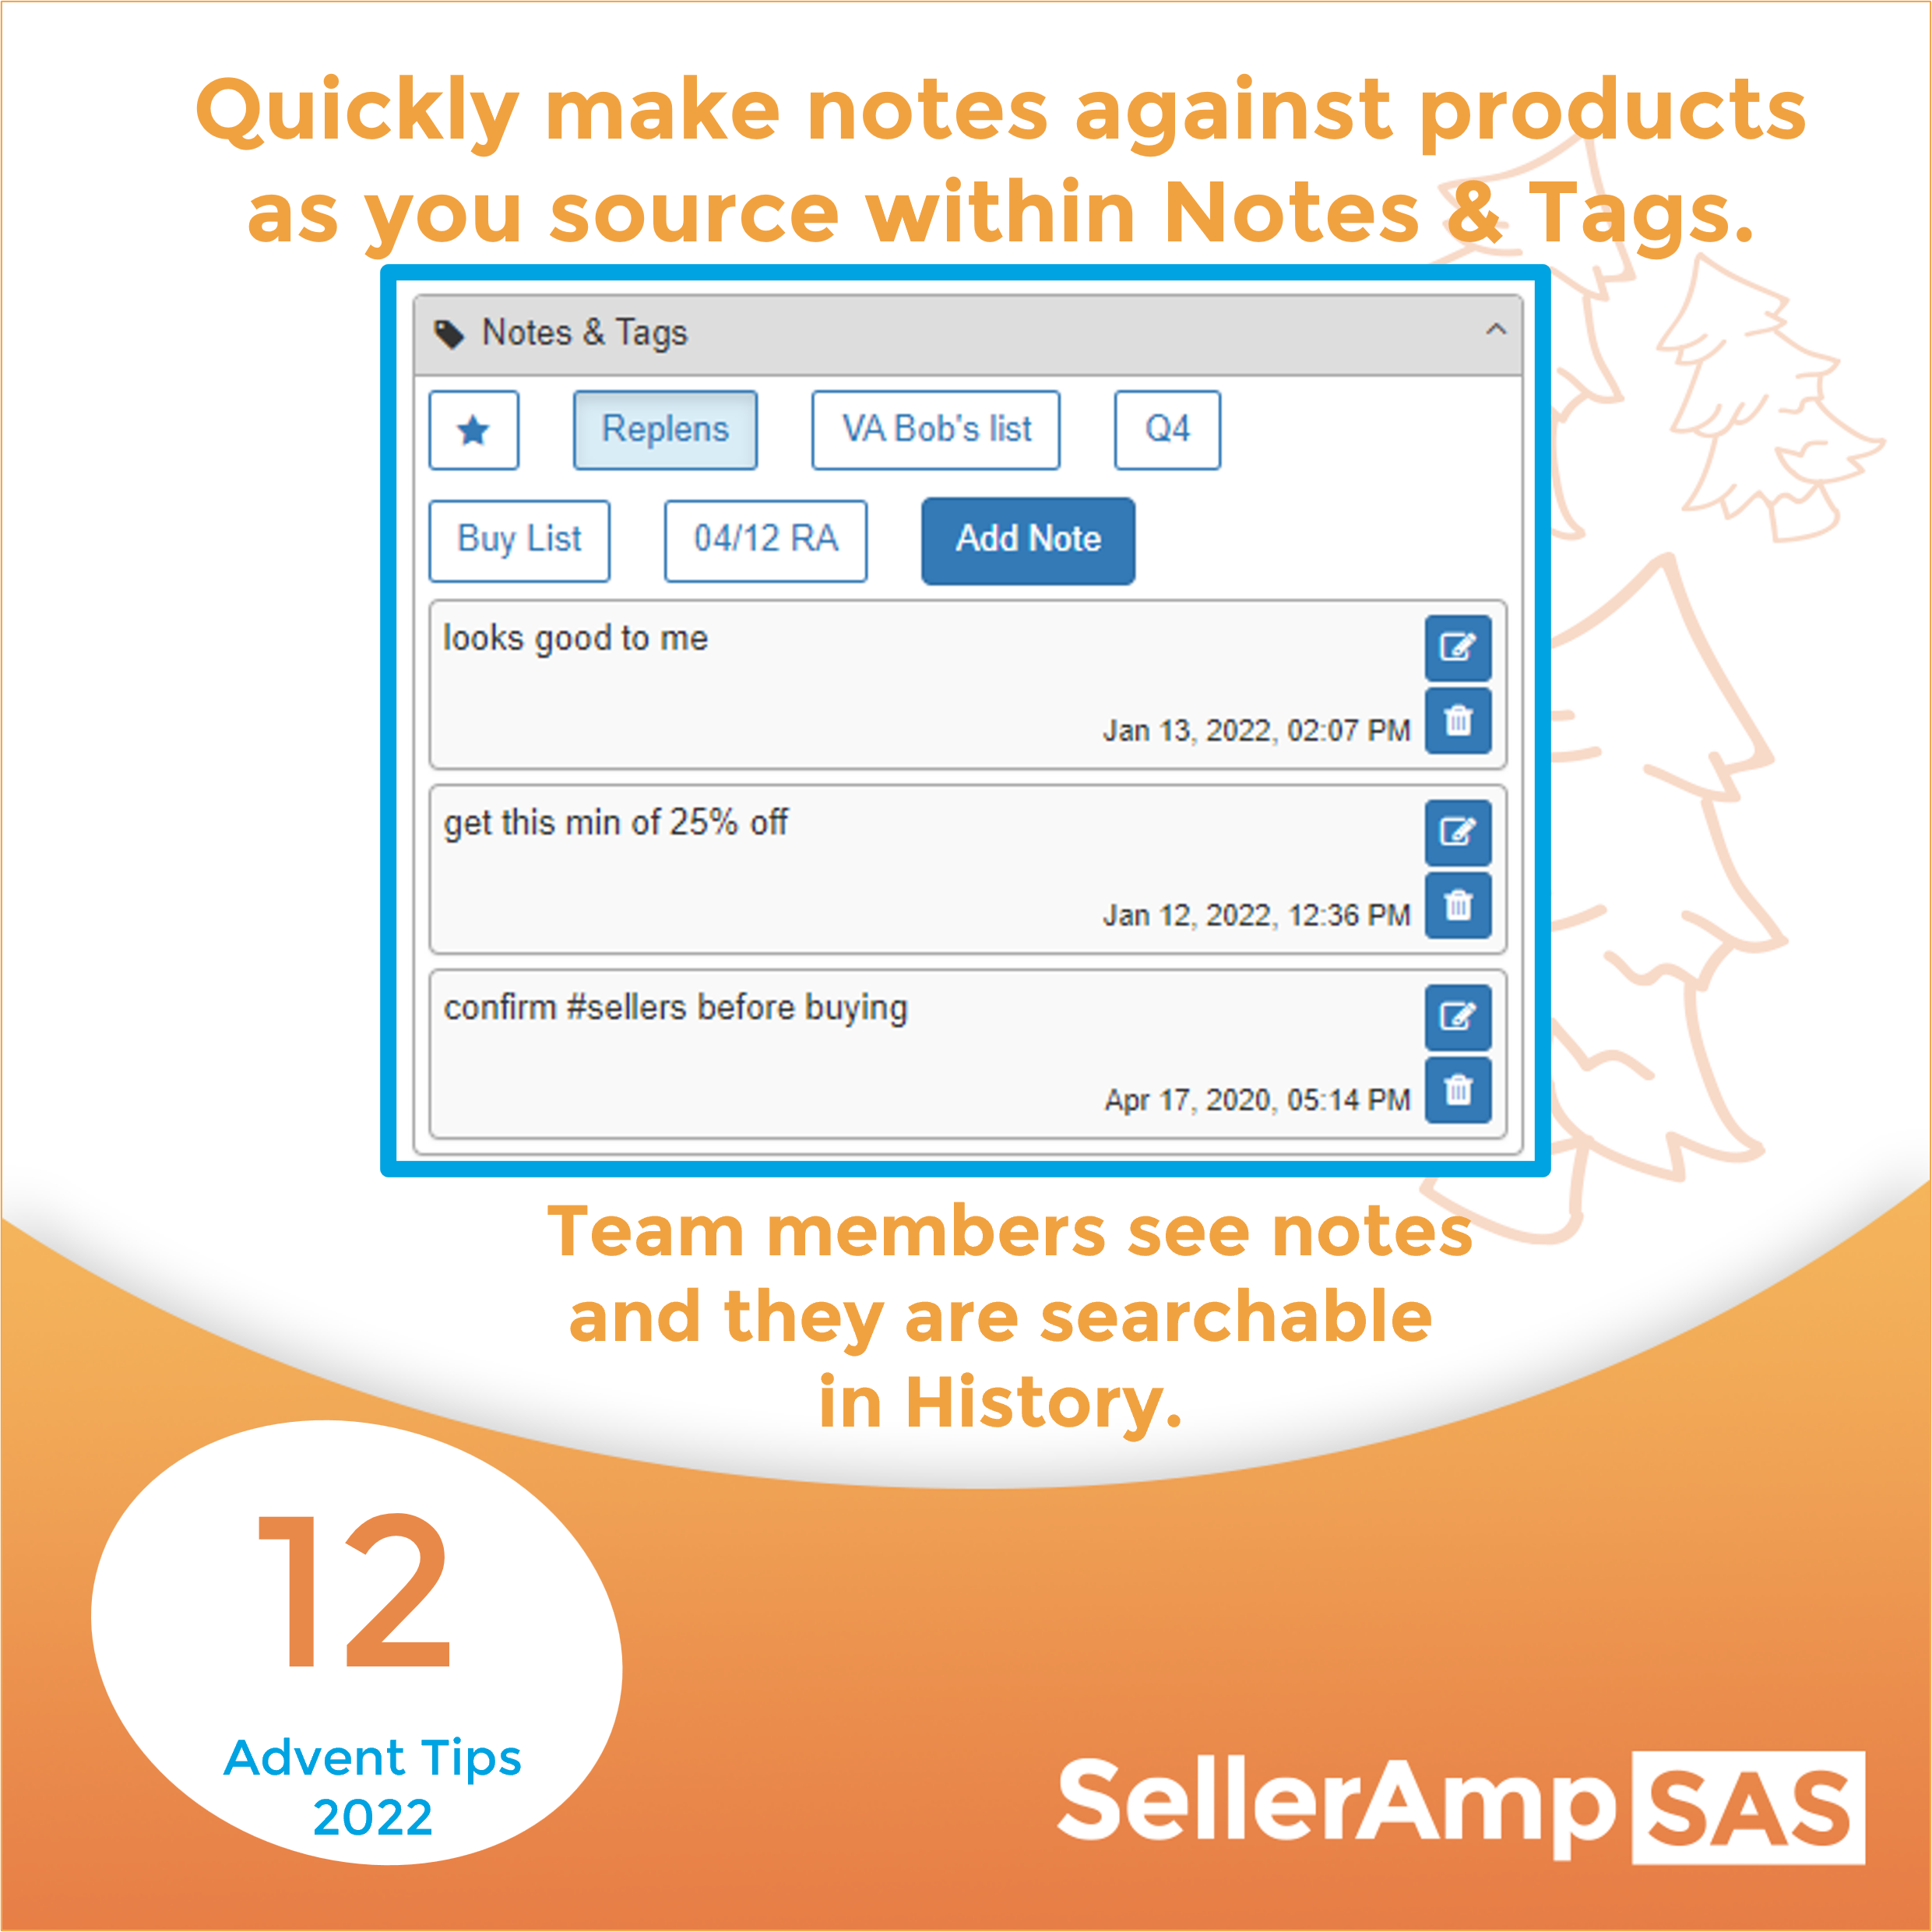 Make notes for yourself or your team in the SAS Notes & Tags panel